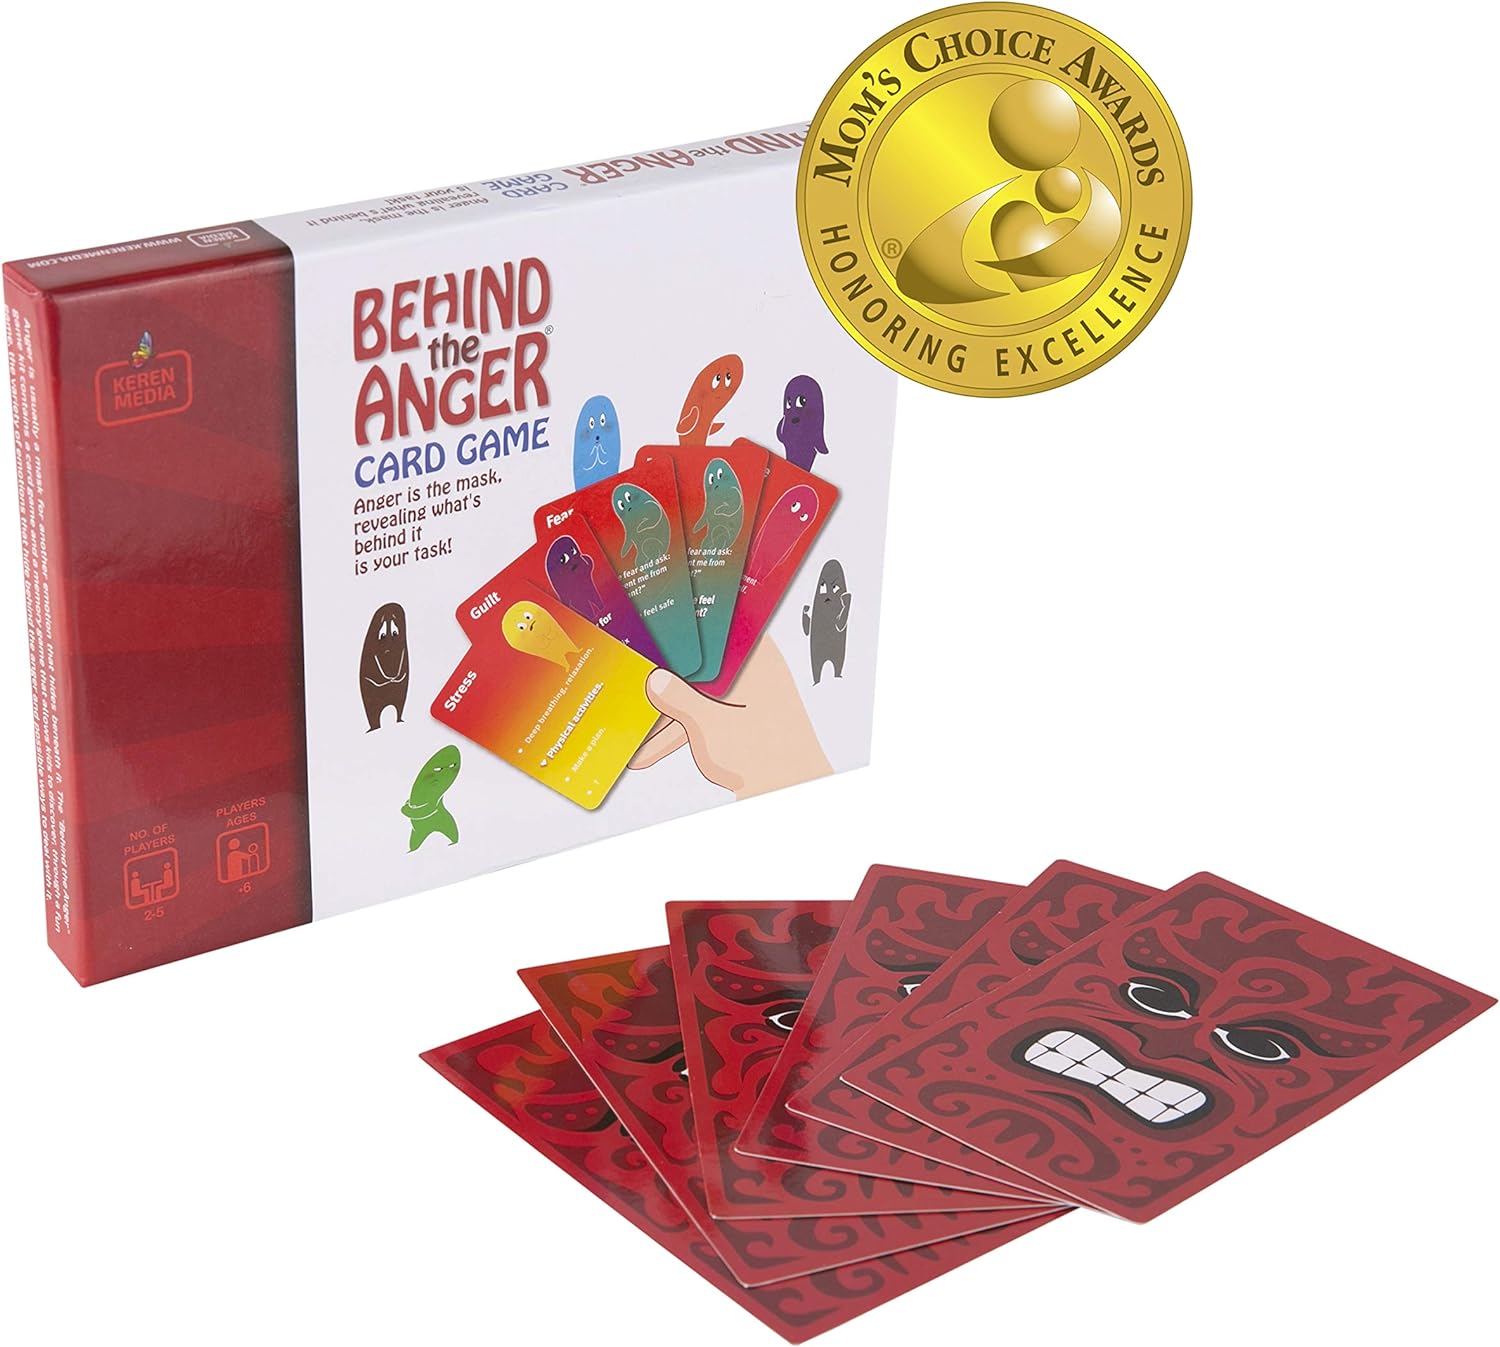 Behind The Anger Card Game for Families - Anger Management Card Game, Comprehensive Anger Control Solution to Develop Coping Skills